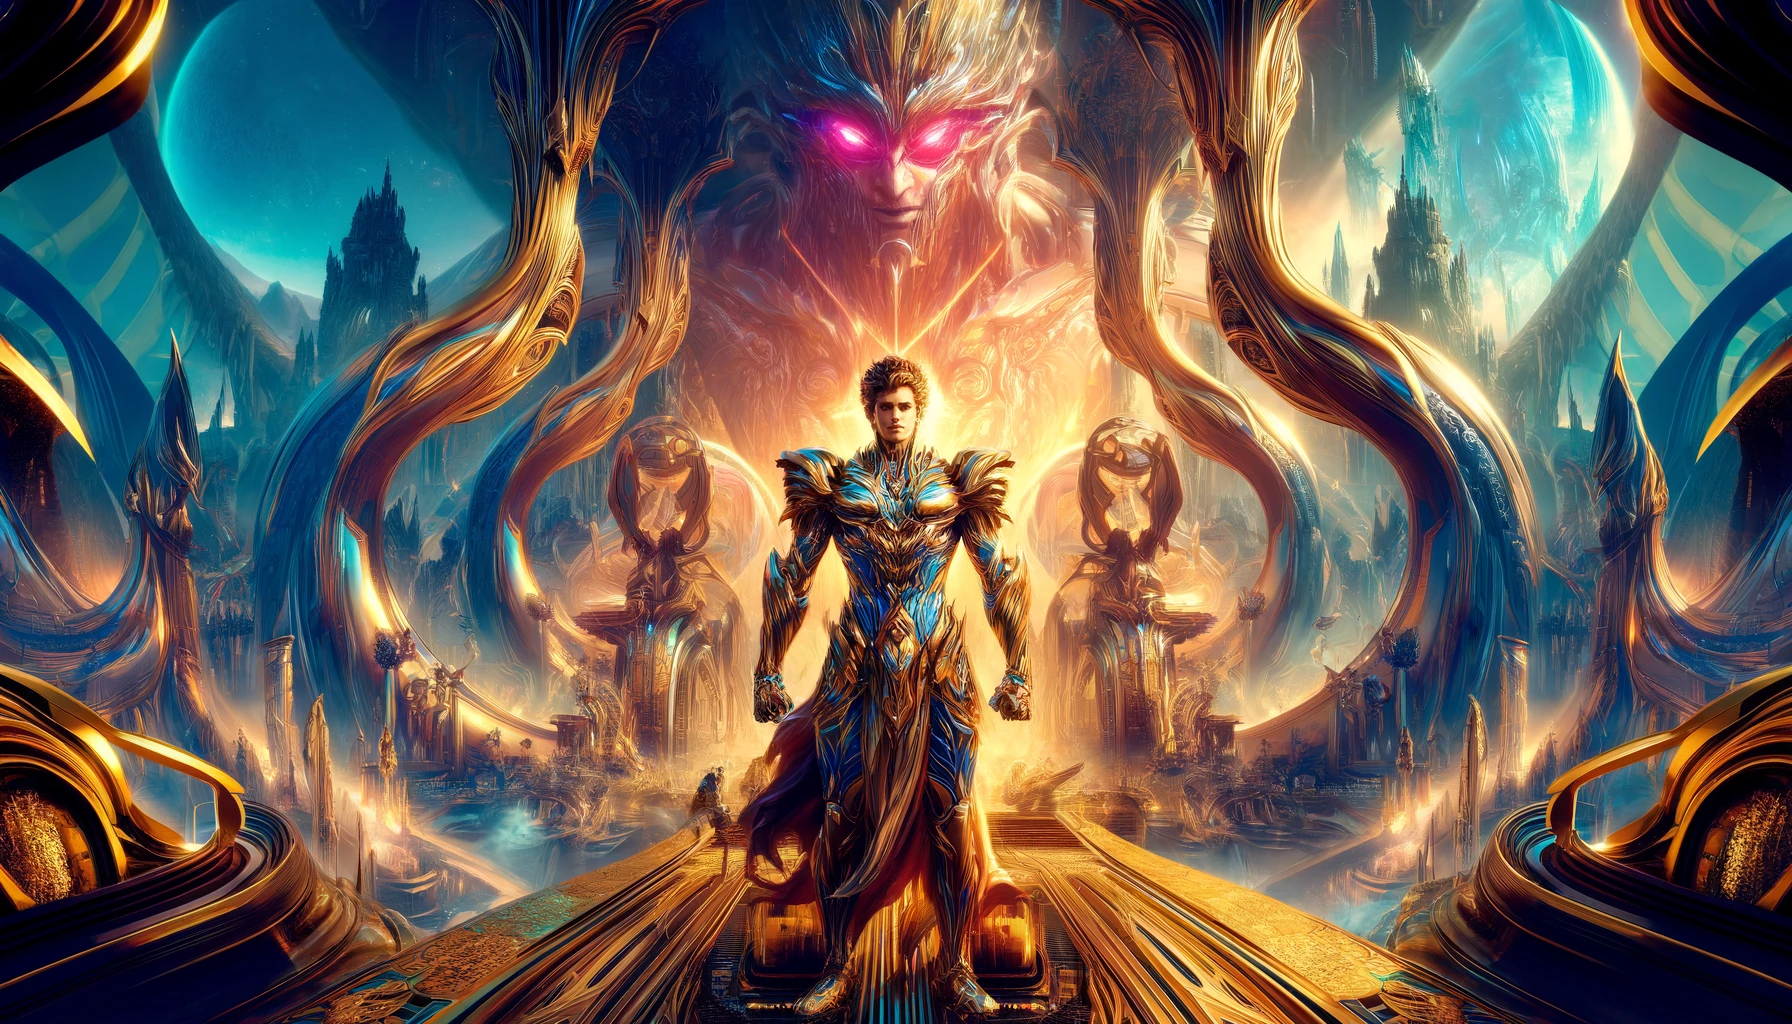 A vibrant and detailed illustration of Gilgamesh standing confidently in a grand, fantastical environment. The setting blends ancient and futuristic elements, with Gilgamesh surrounded by dynamic energy, evoking a sense of wonder and adventure.